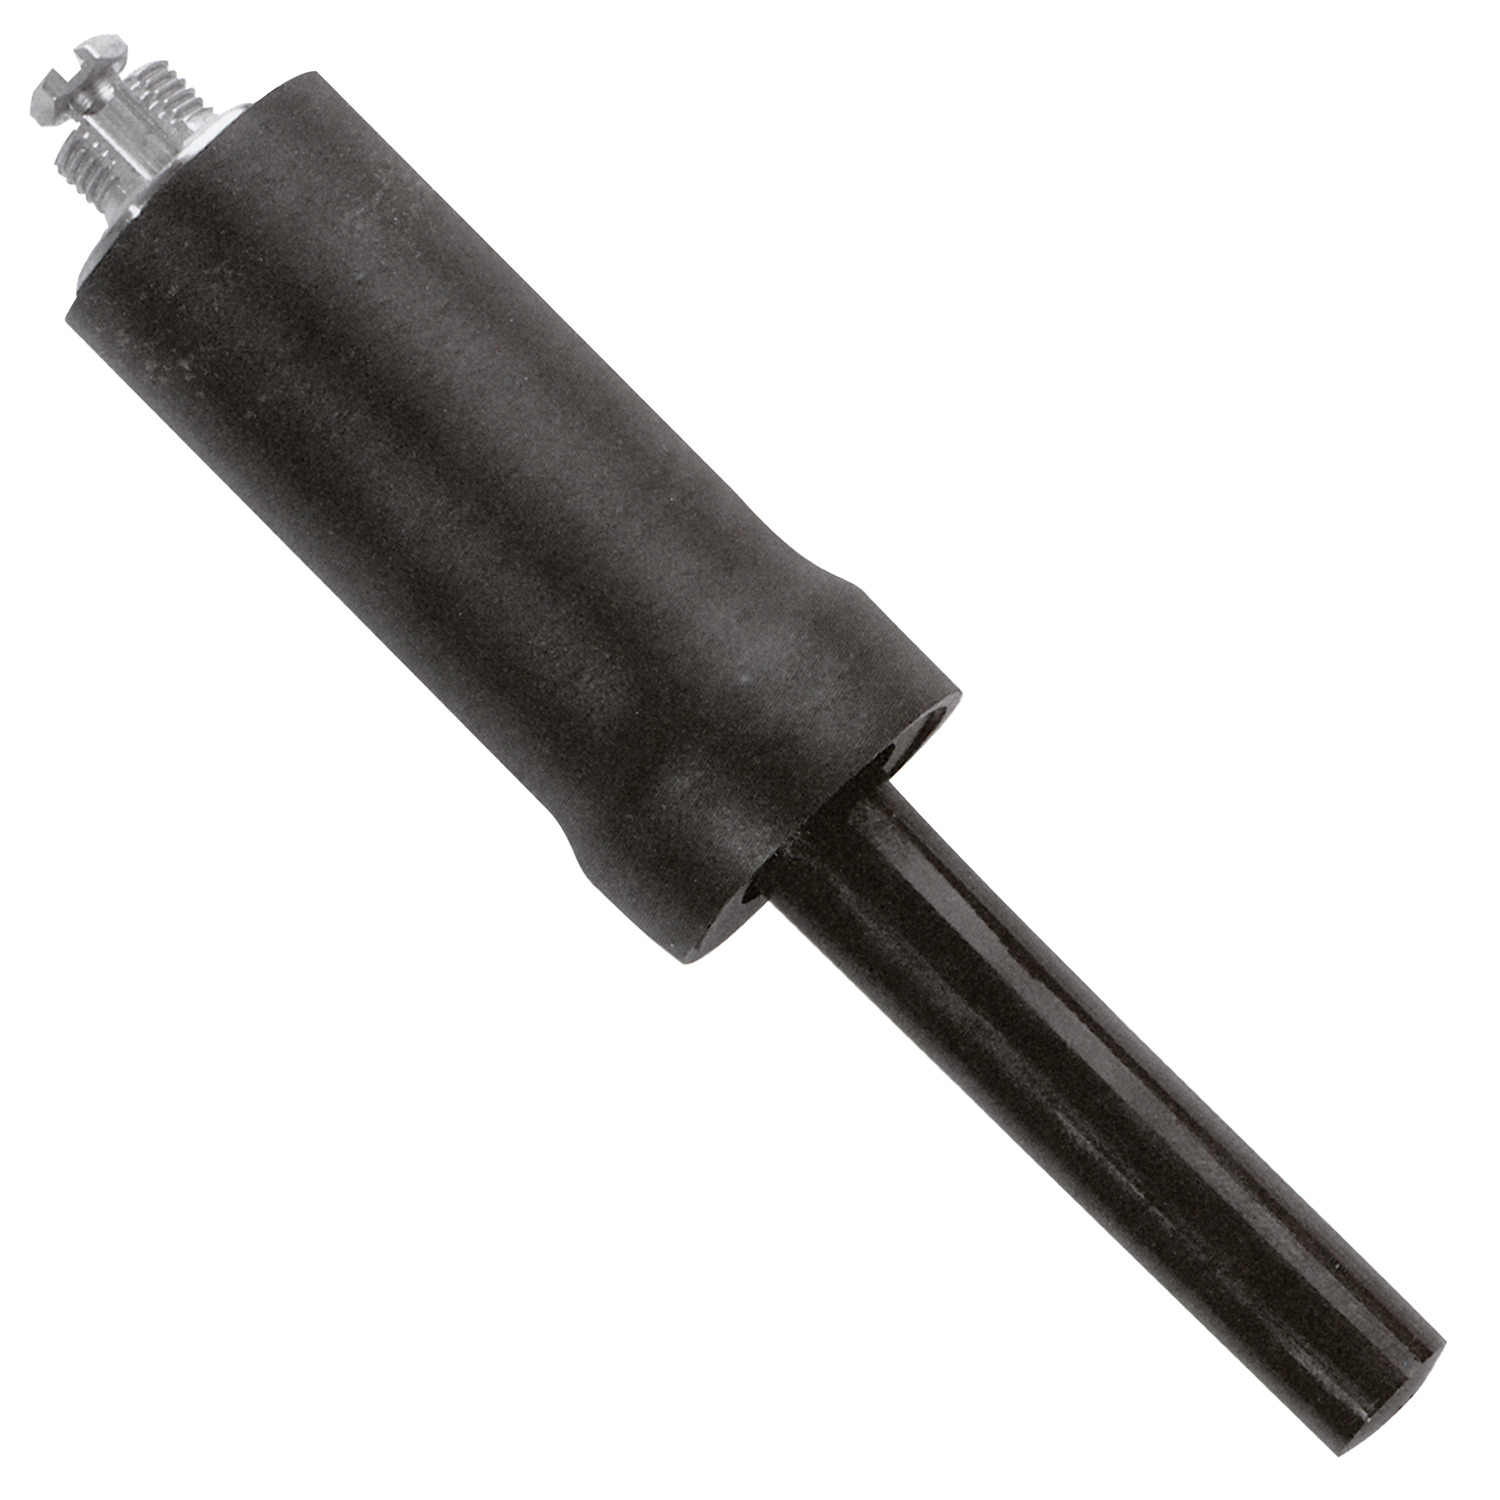 Shock Absorber Bore sizes from 0.627" to 1.75" and level of damping is easily adjustable by hand